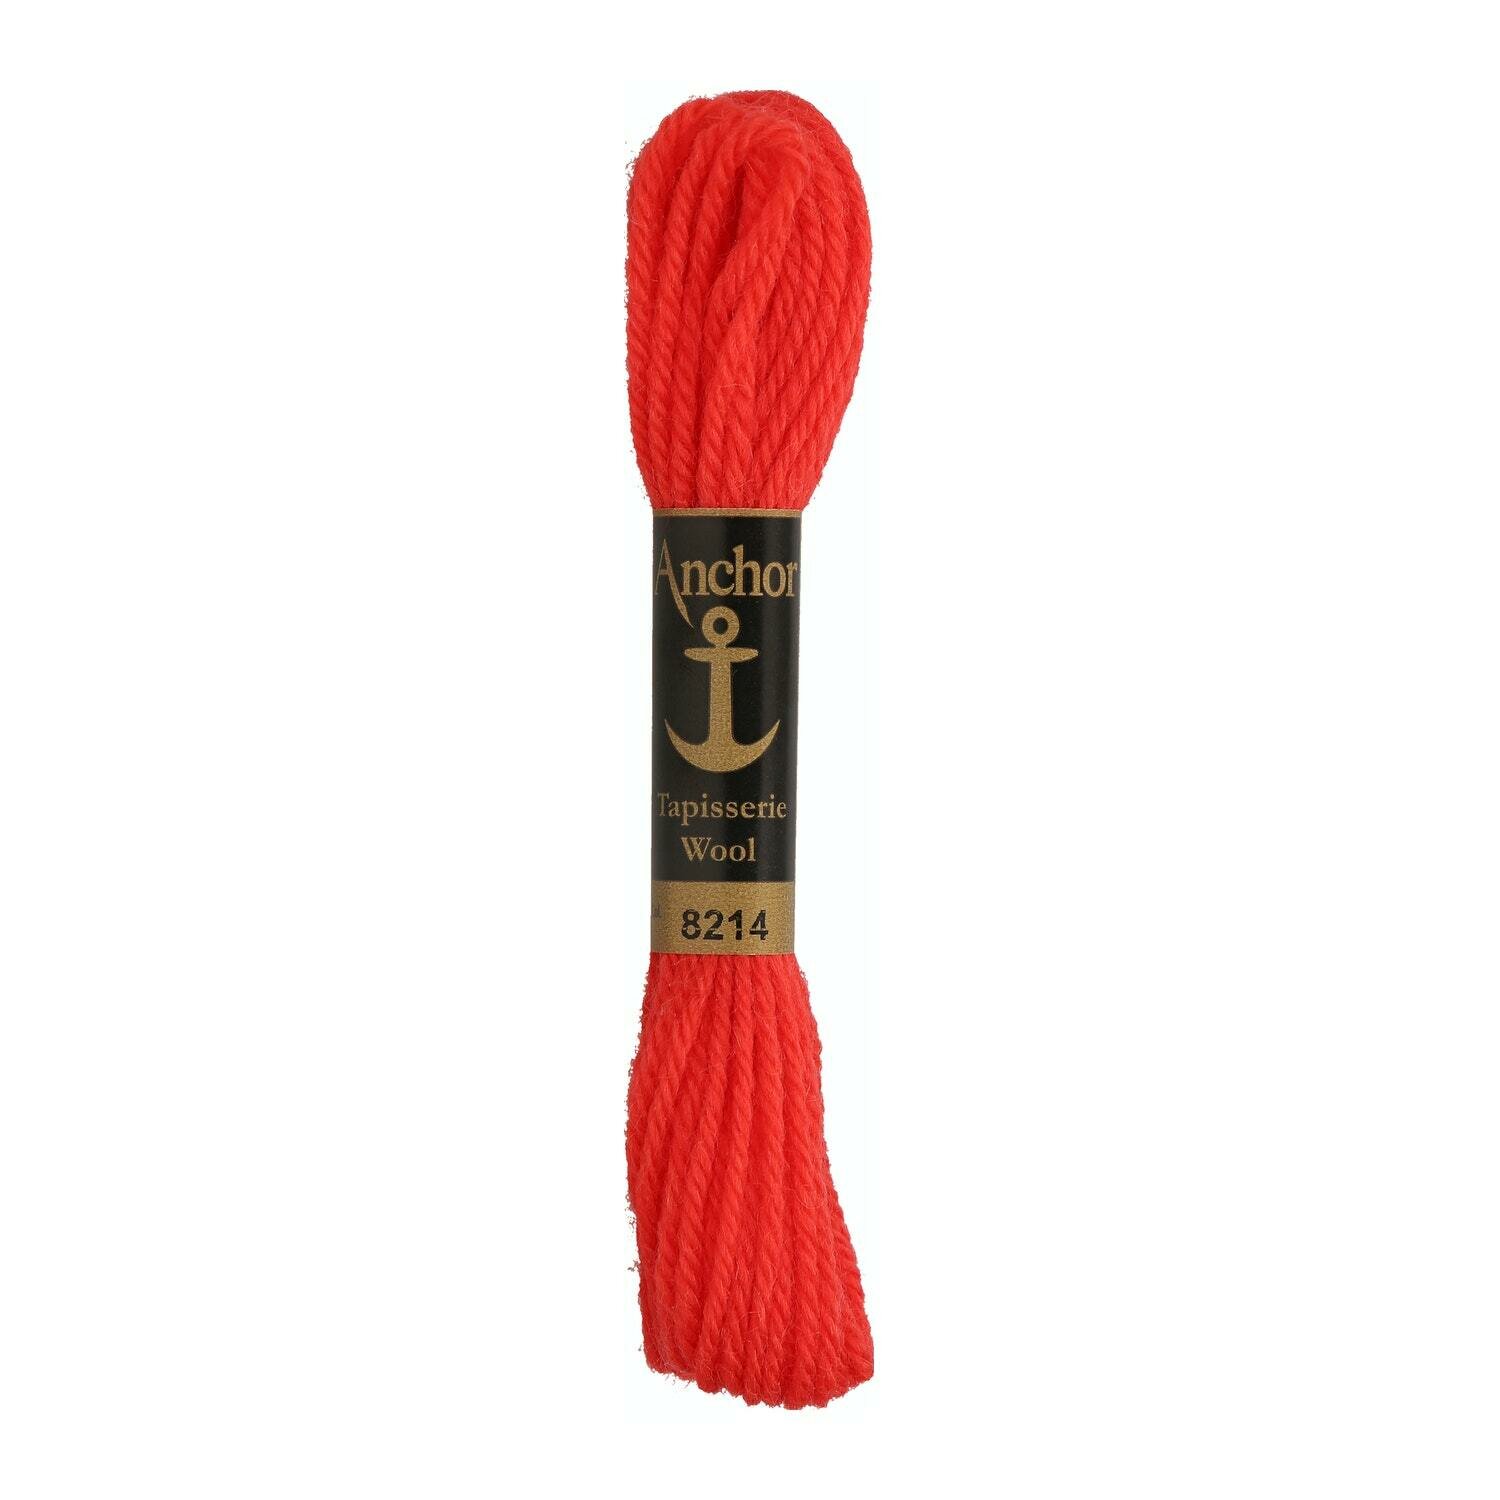 Anchor Tapisserie Wool #  08214